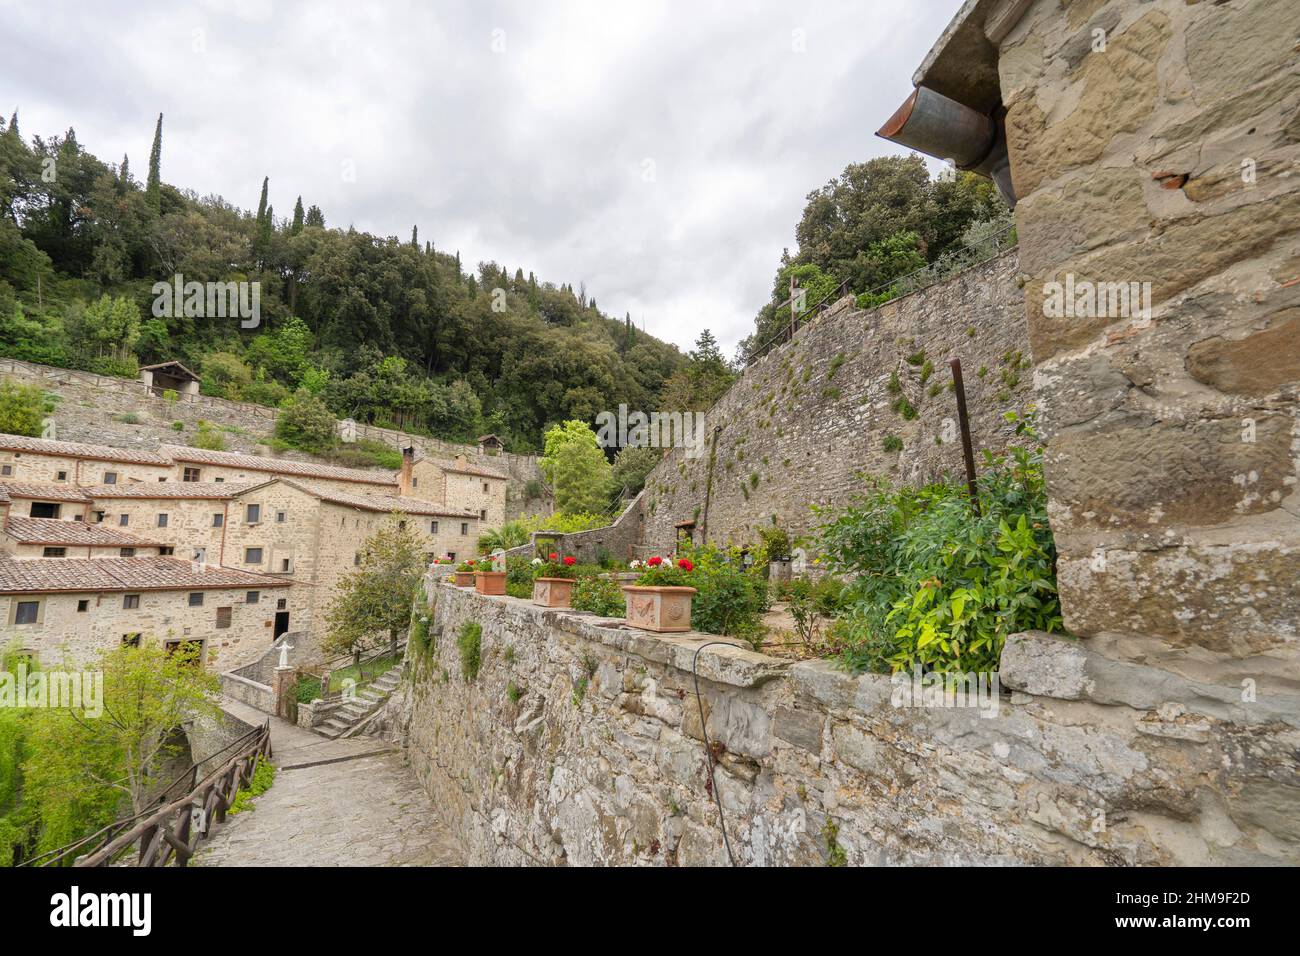 The Convent de Le Celle is a 13th-century Franciscan Convent located in Le Celle, Torreone, Cortona, Tuscany, Italy, Europe Stock Photo